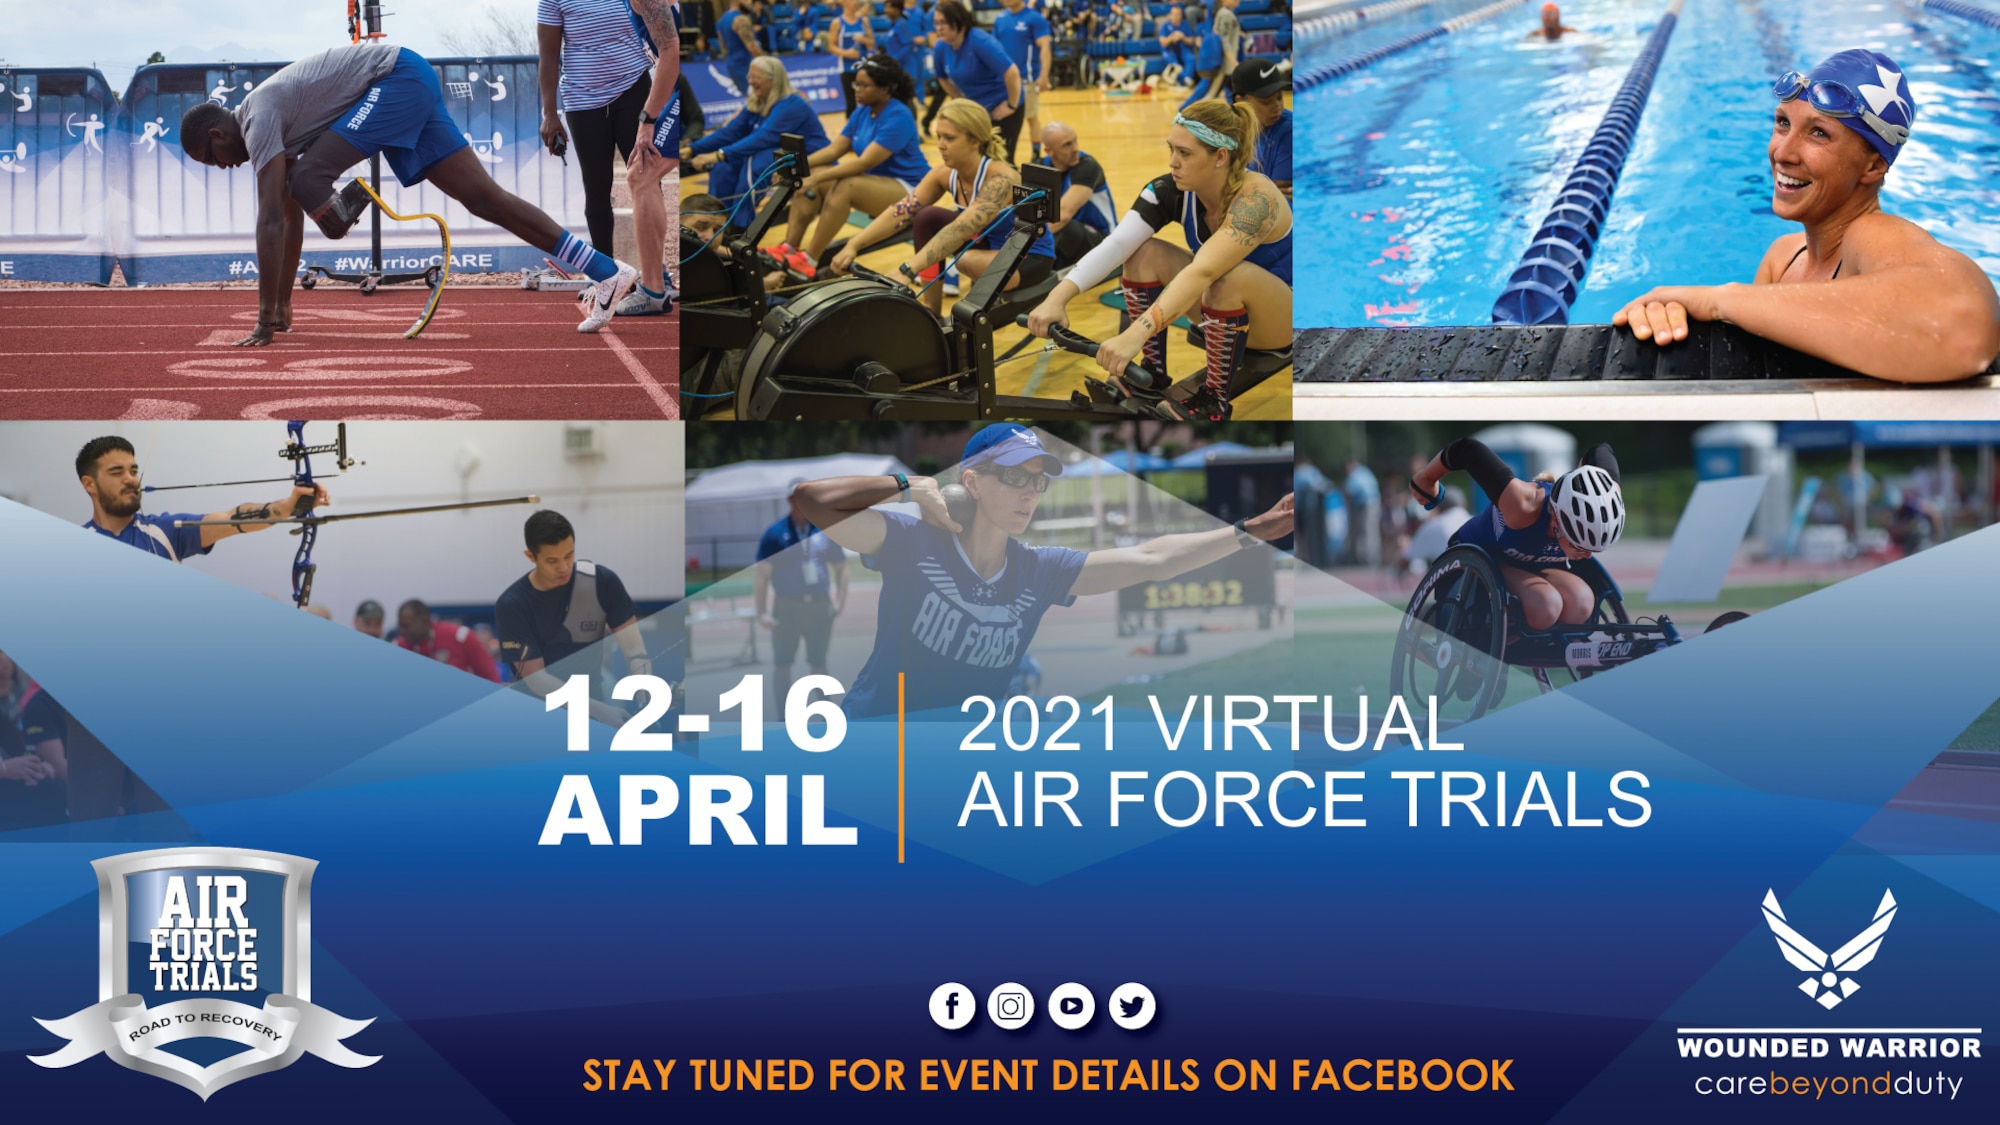 The Air Force Wounded Warrior Program (AFW2) is excited for Warriors to obtain their best at the 7th annual Air Force Trials! Given the current COVID–19 environment AFW2 will execute a virtual Air Force Trials (AFT) this year hosting virtual competitions, athlete classification and Warrior Games team selection.